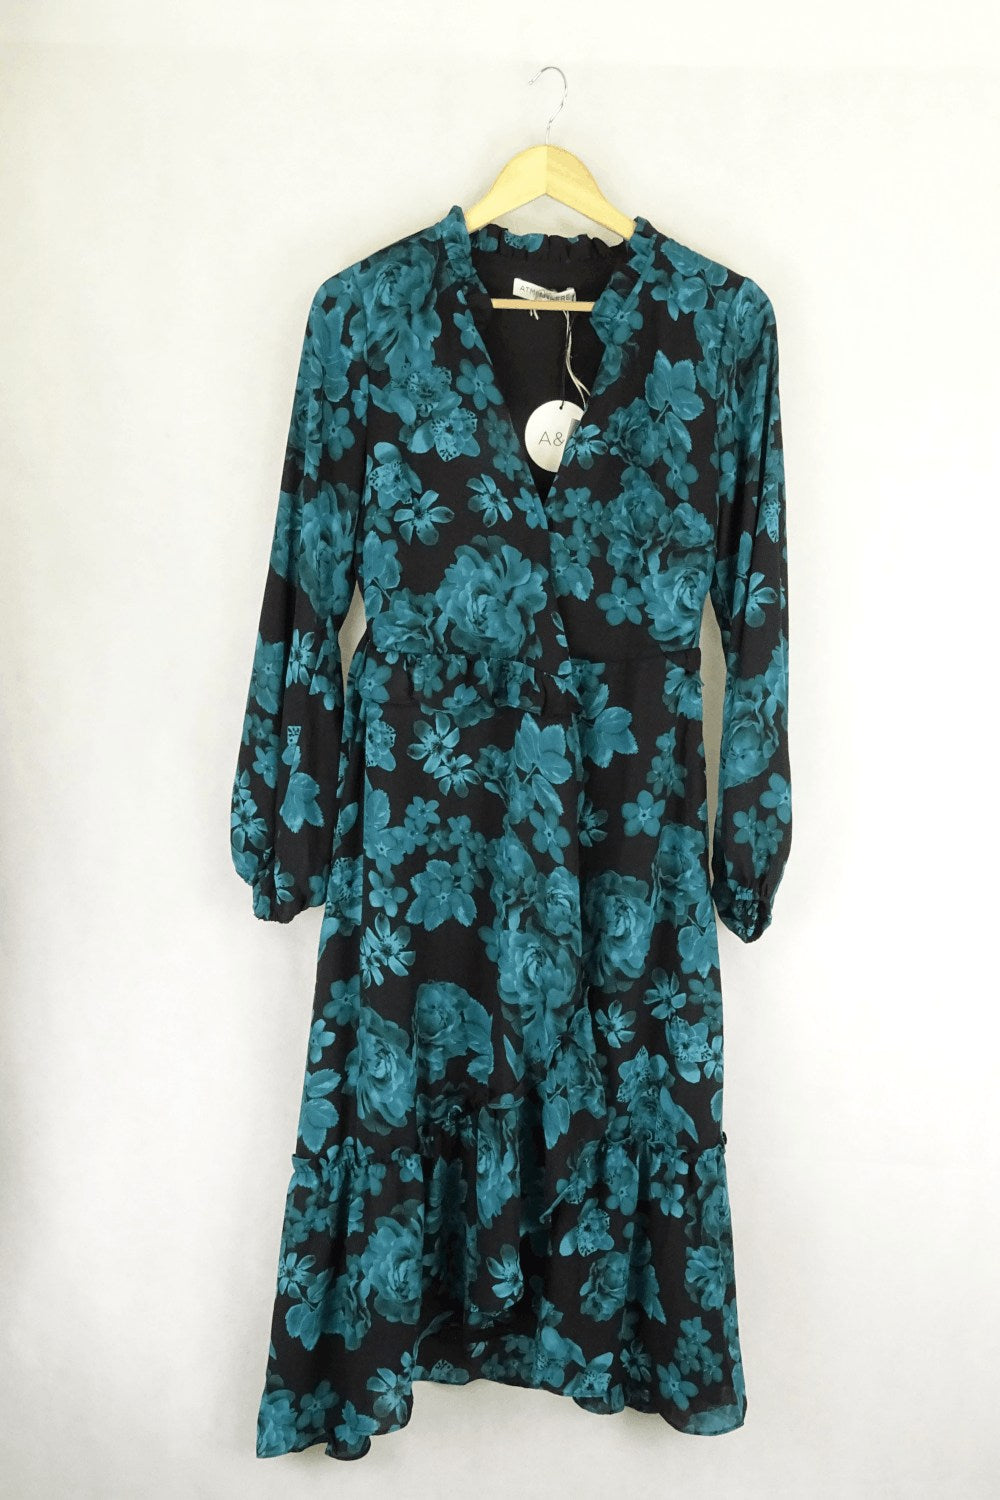 Atmos And Here Floral Wrap Dress 10